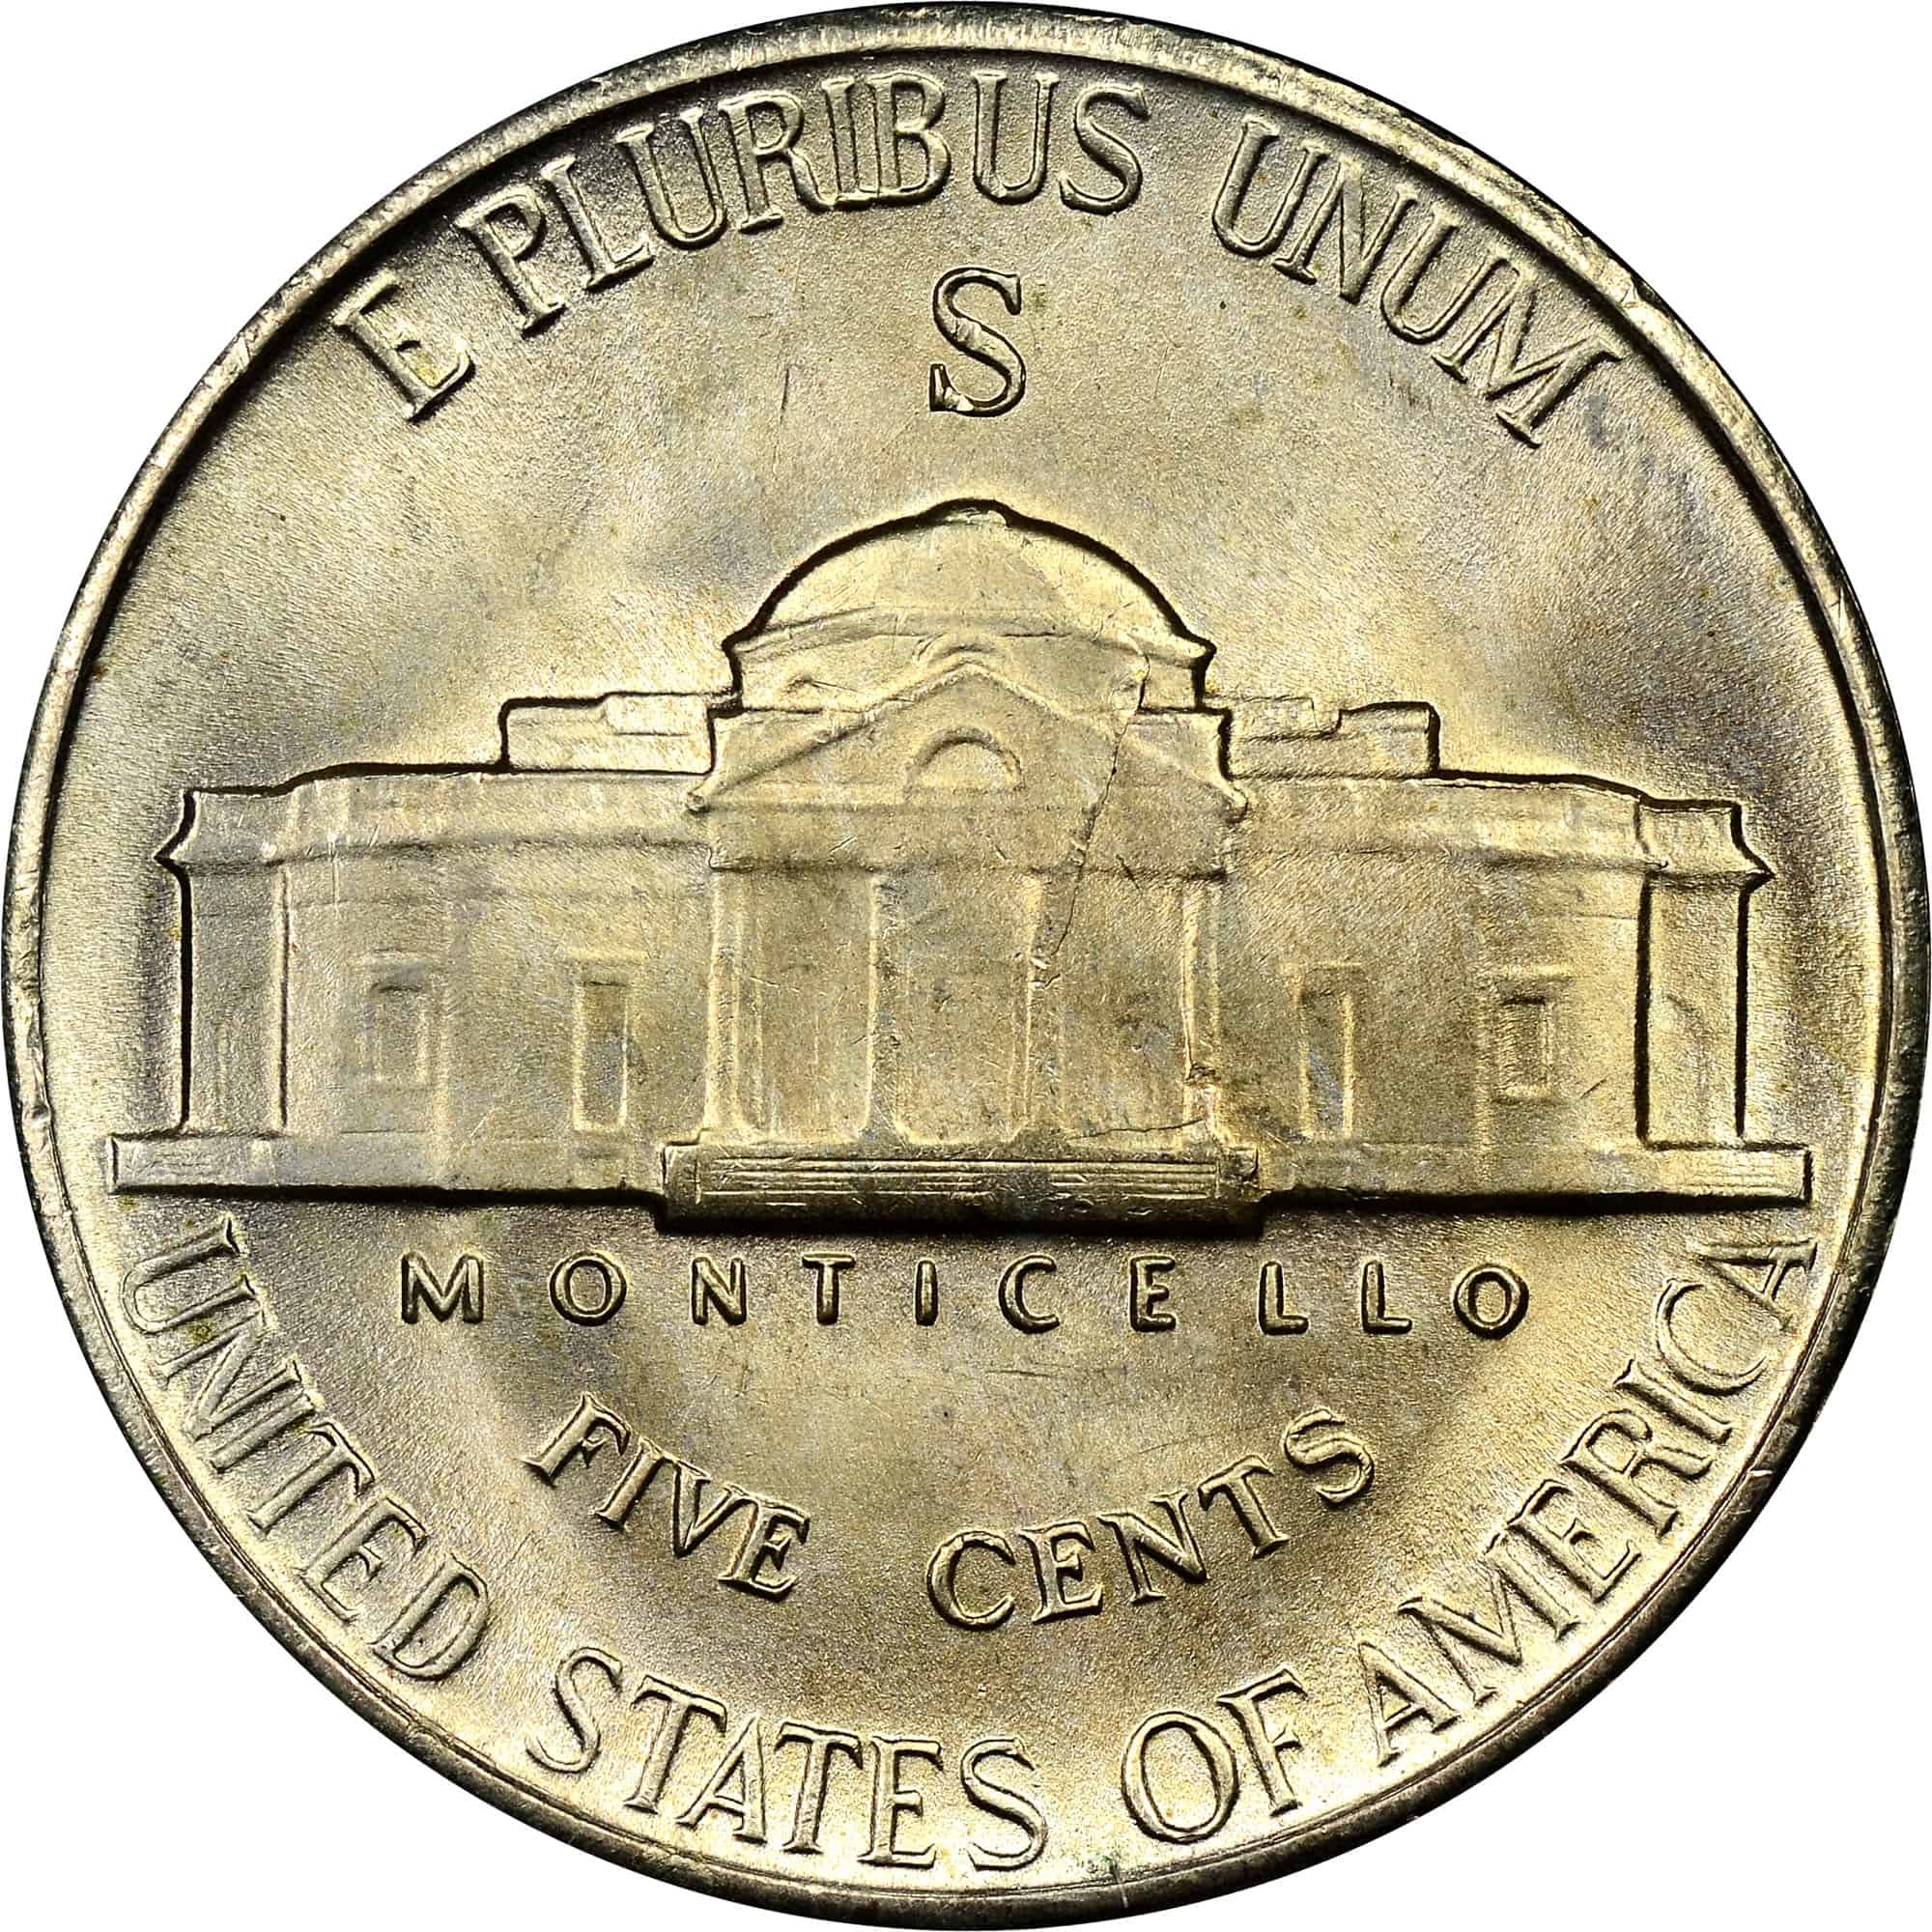 The Reverse of the 1942 Nickel